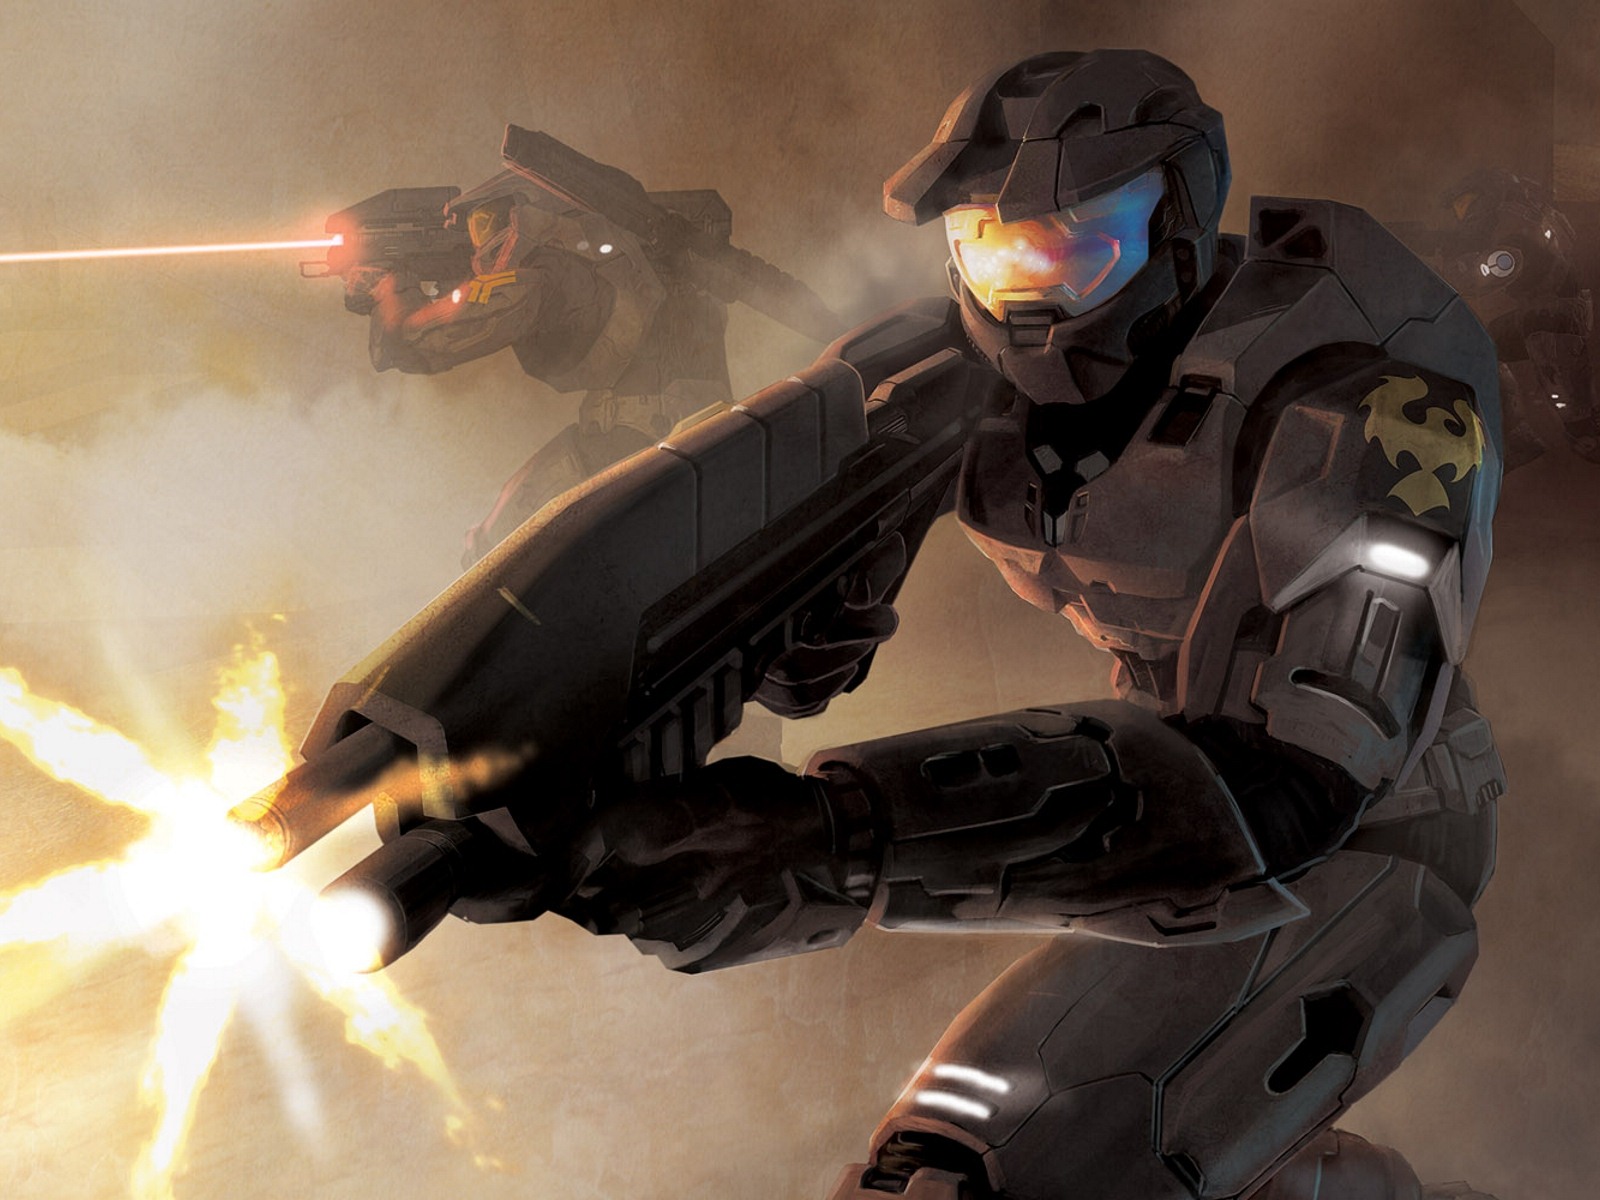 Halo game HD wallpapers #10 - 1600x1200